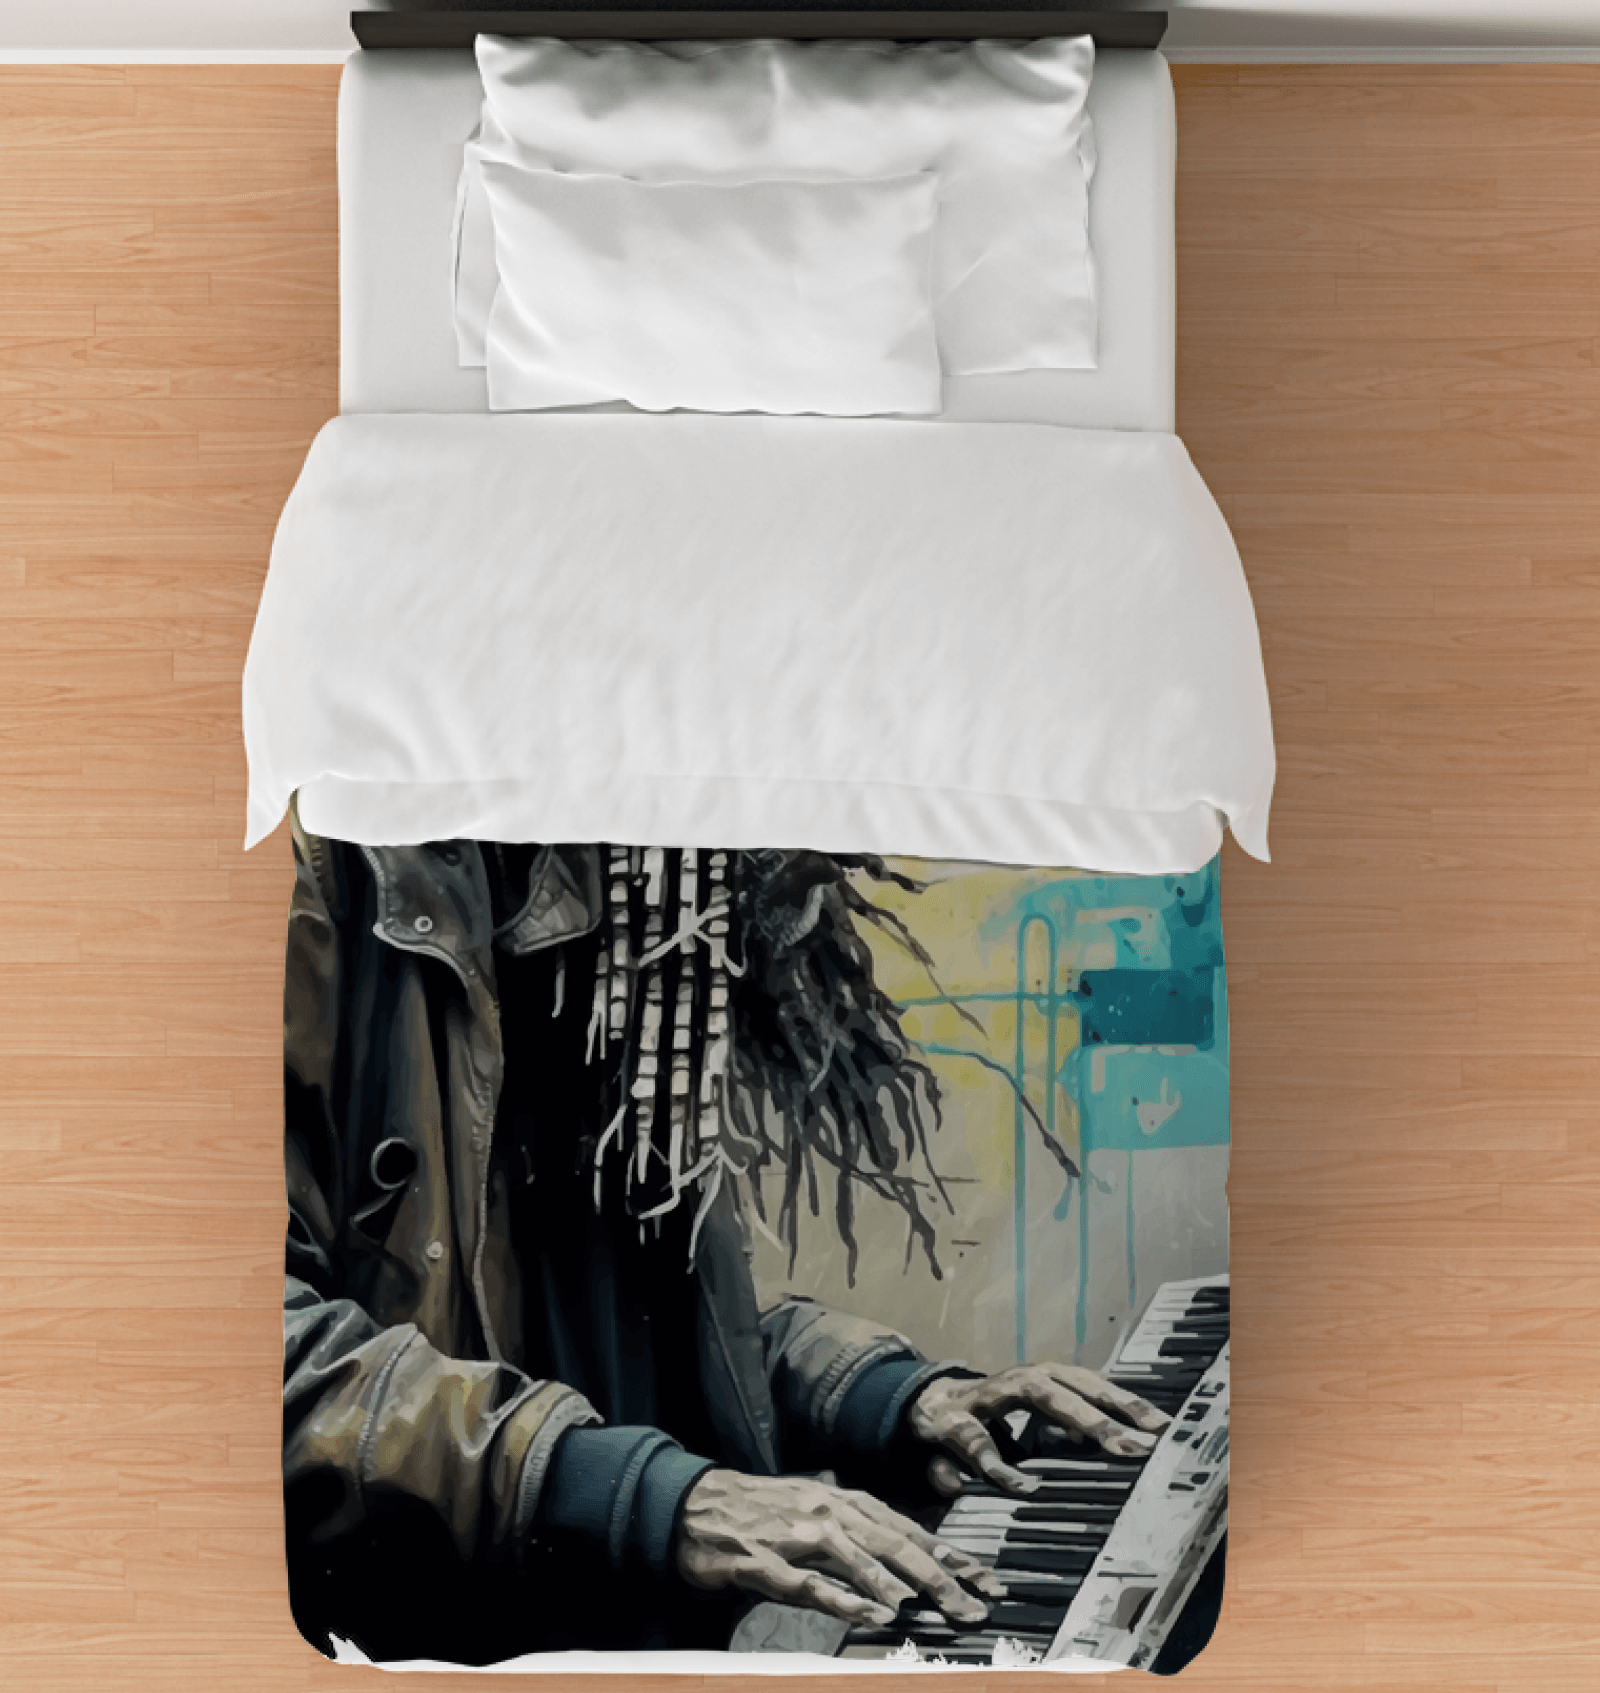 Finger Wizardry In Action Comforter - Twin - Beyond T-shirts